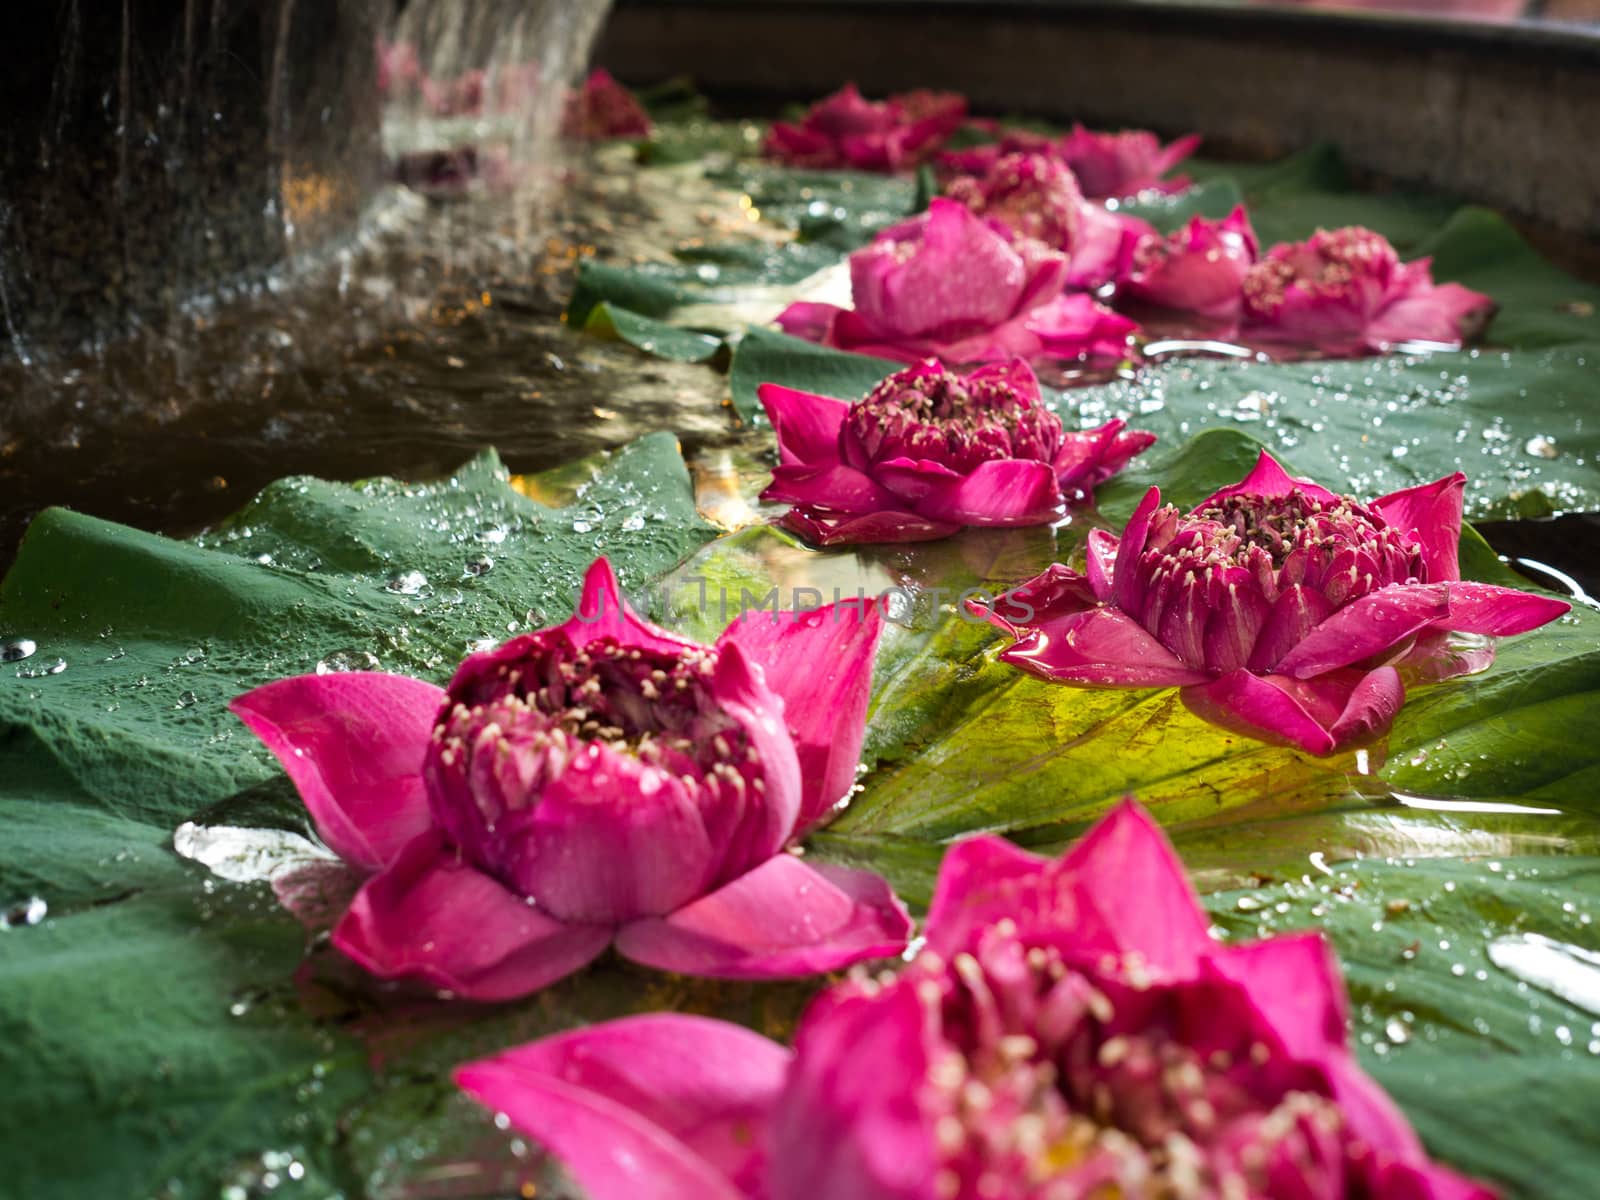 The pink lotus is on the lotus leaf. With drops on the leaf The left side is a small waterfall.